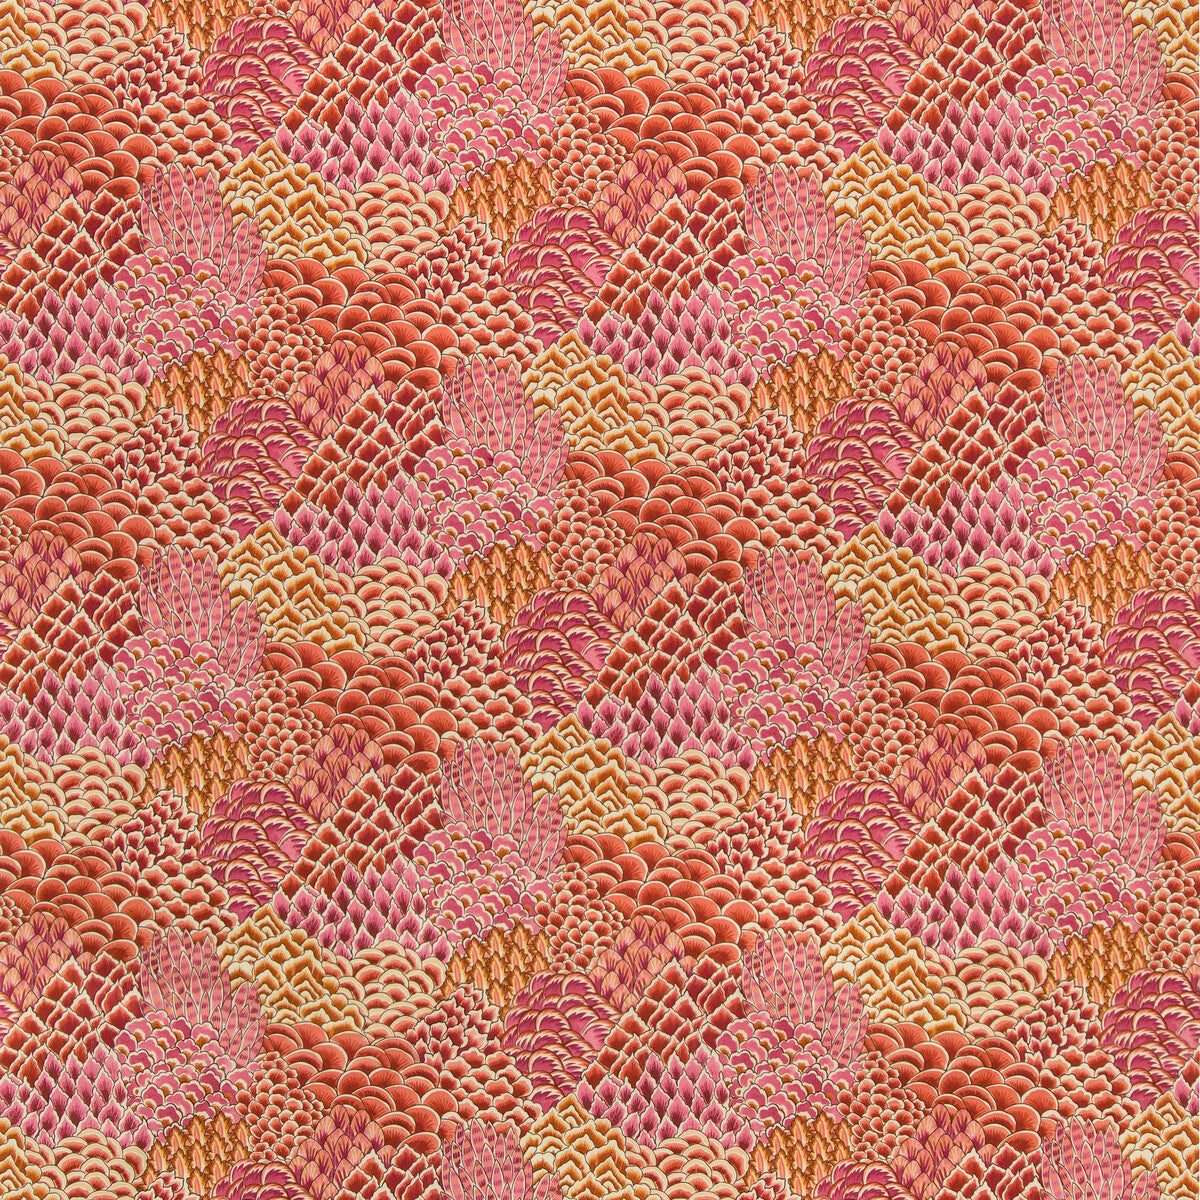 Katibi Print fabric in pink color - pattern 8020104.712.0 - by Brunschwig &amp; Fils in the Grand Bazaar collection